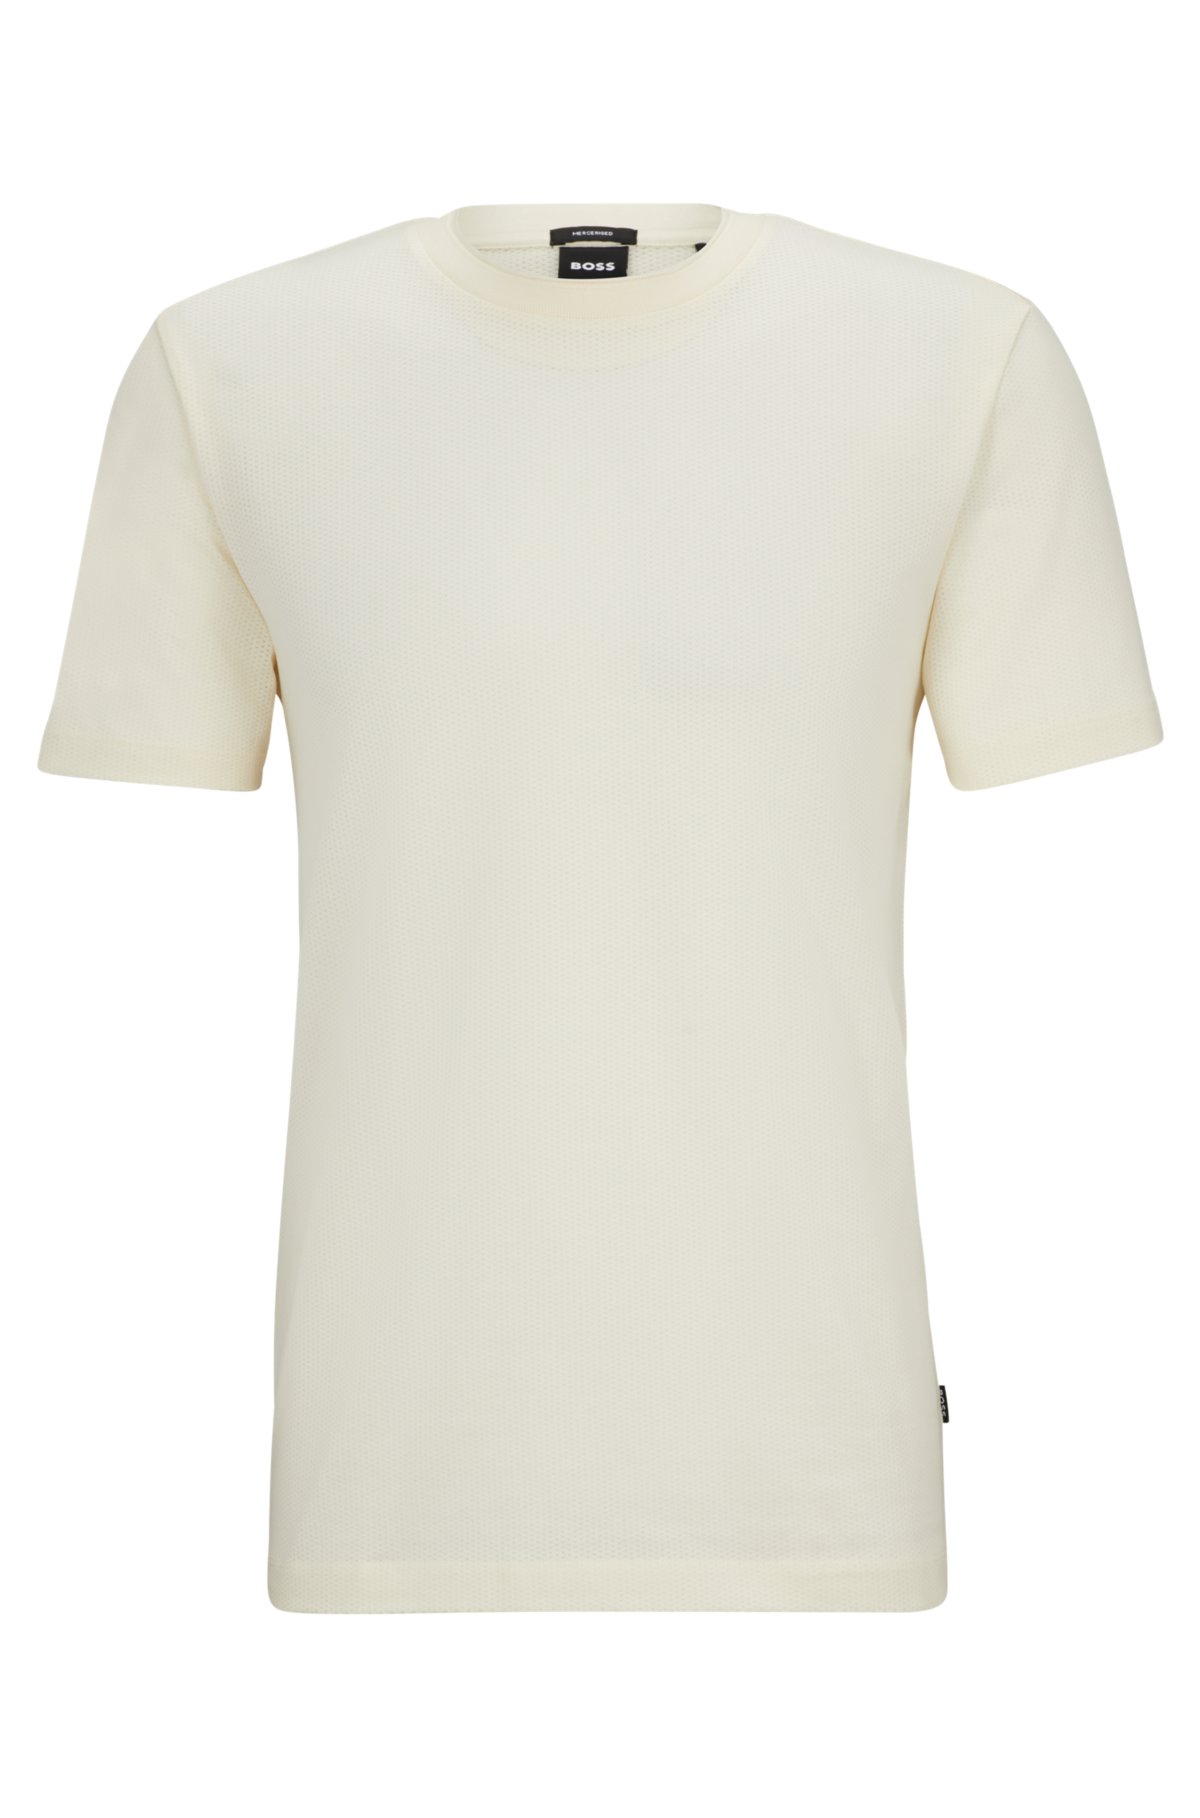 Mesh-structure T-shirt in a mercerized-cotton blend, White